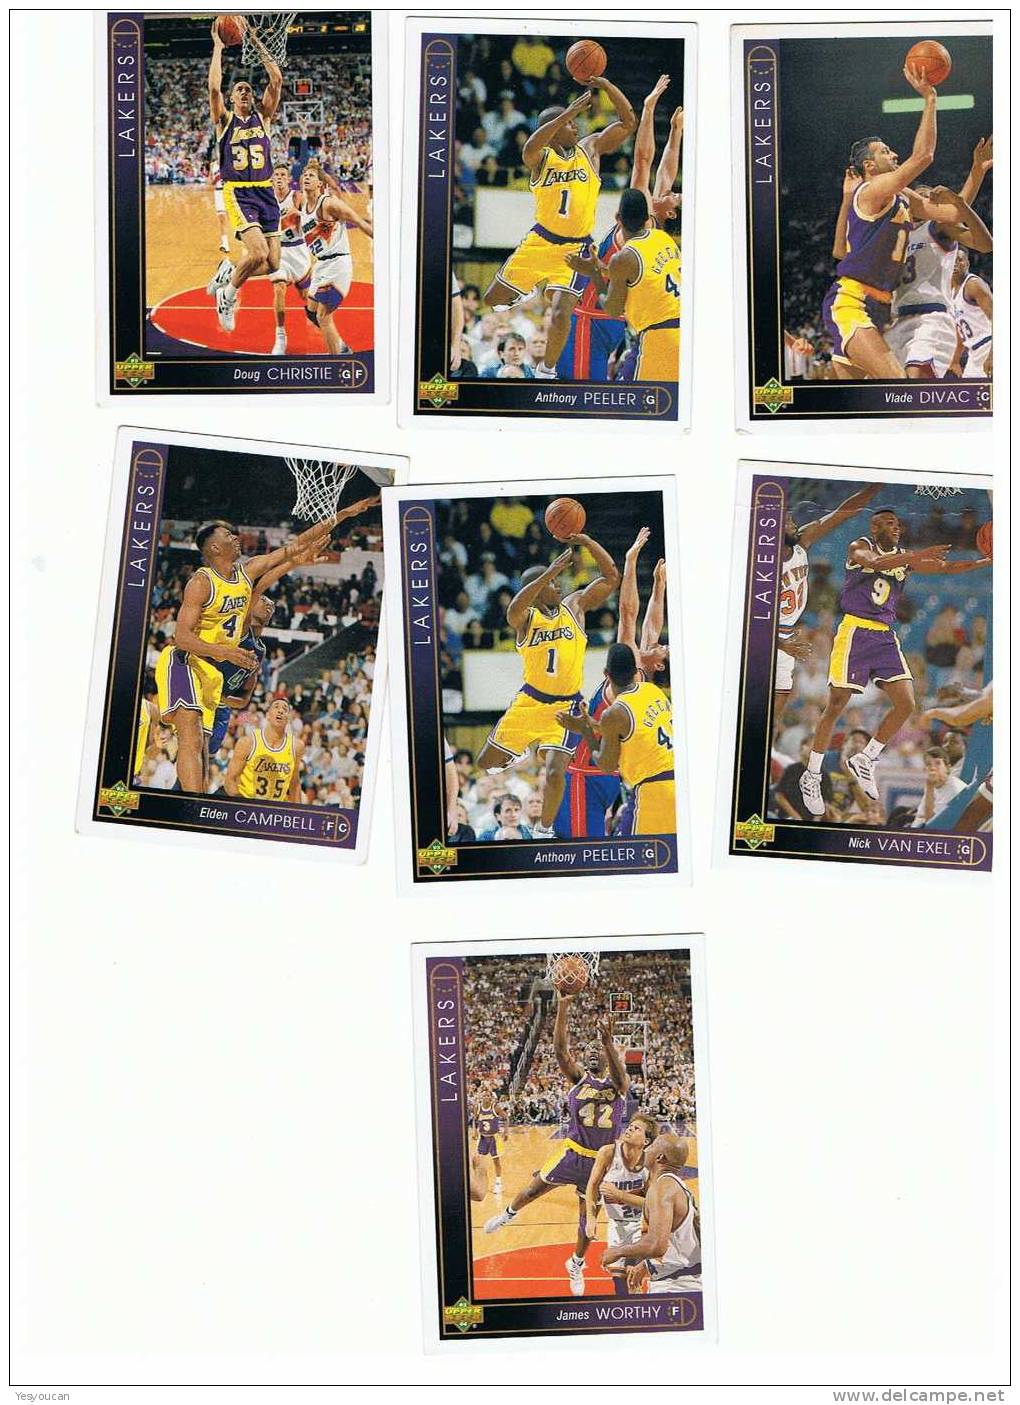 1992-93 Upper Deck Basketball Cards (LAKERS 7) - Lots